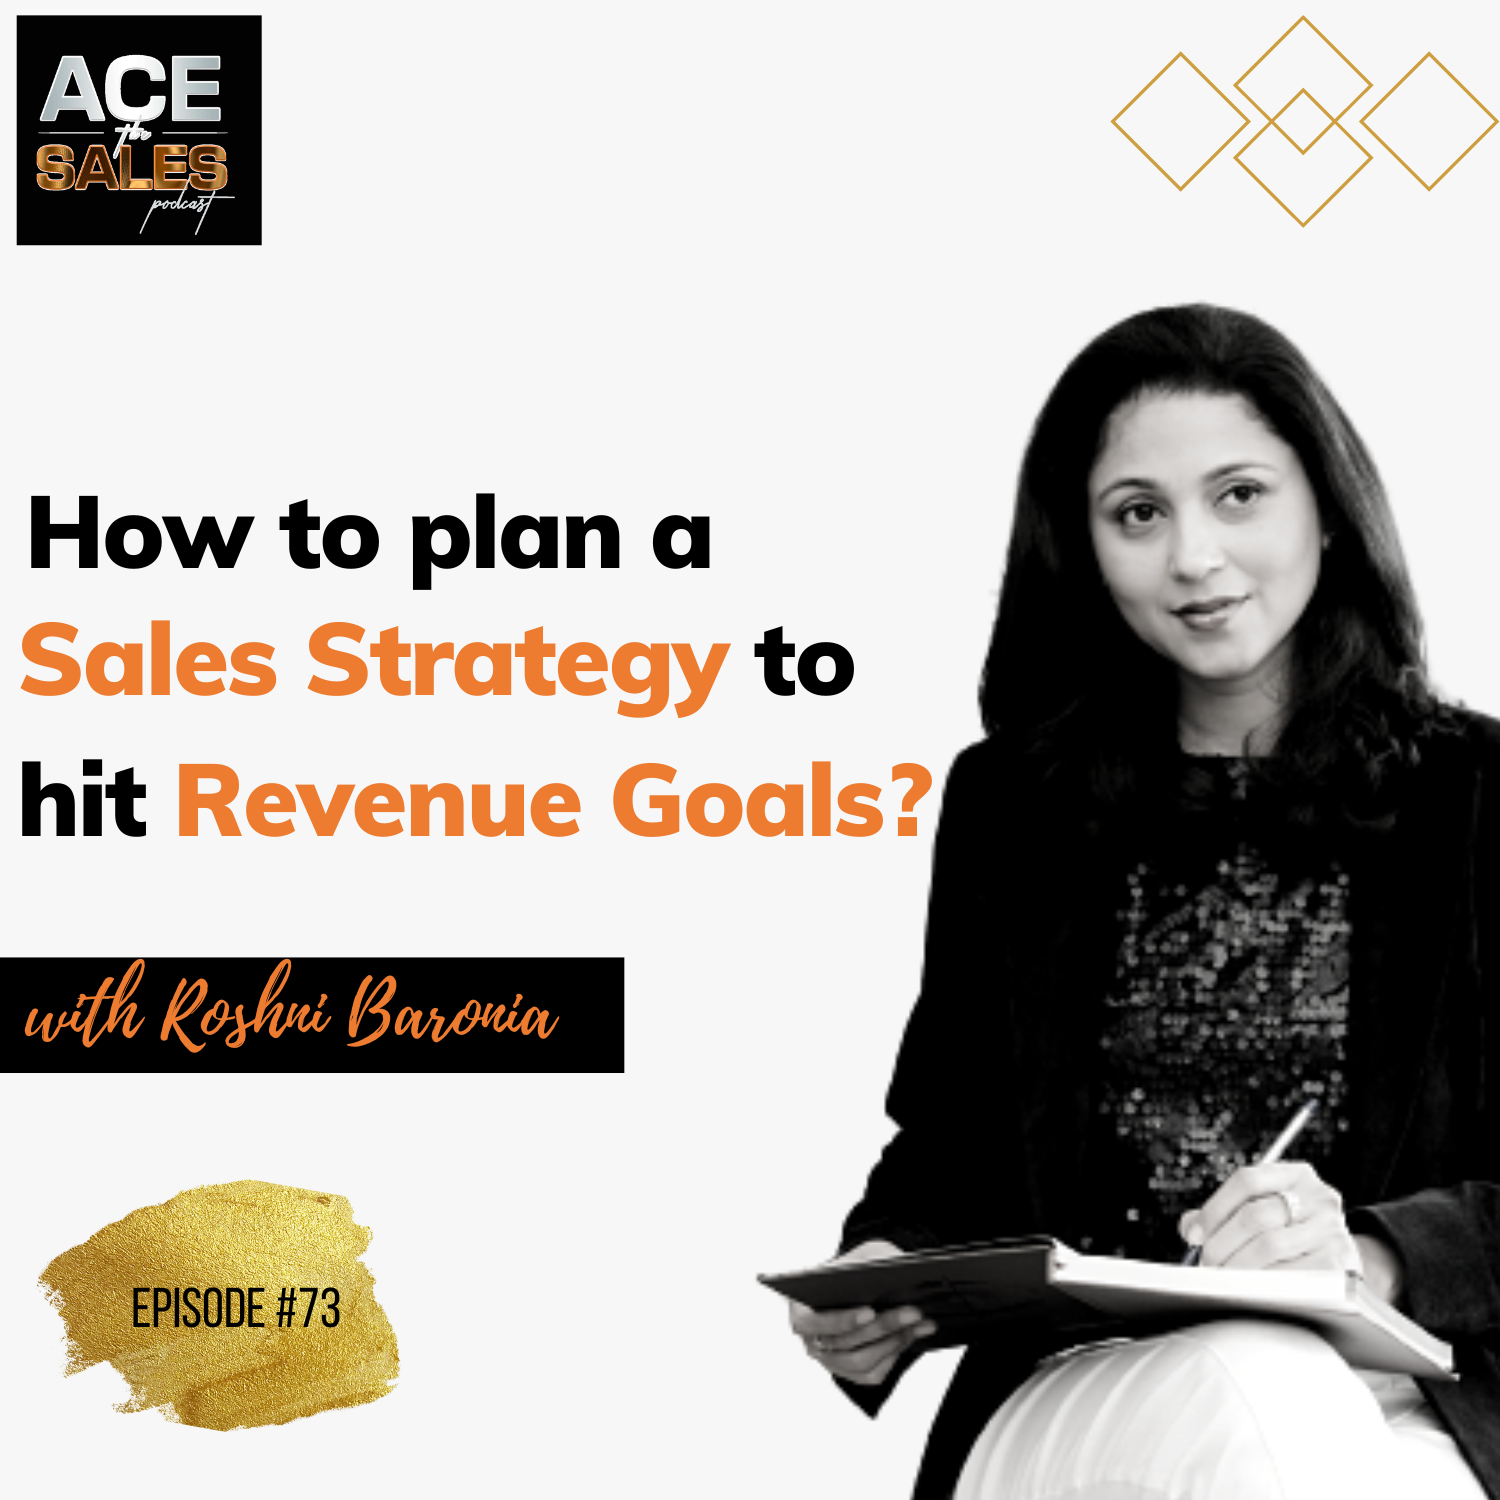 How to plan a Sales Strategy to hit revenue goals?